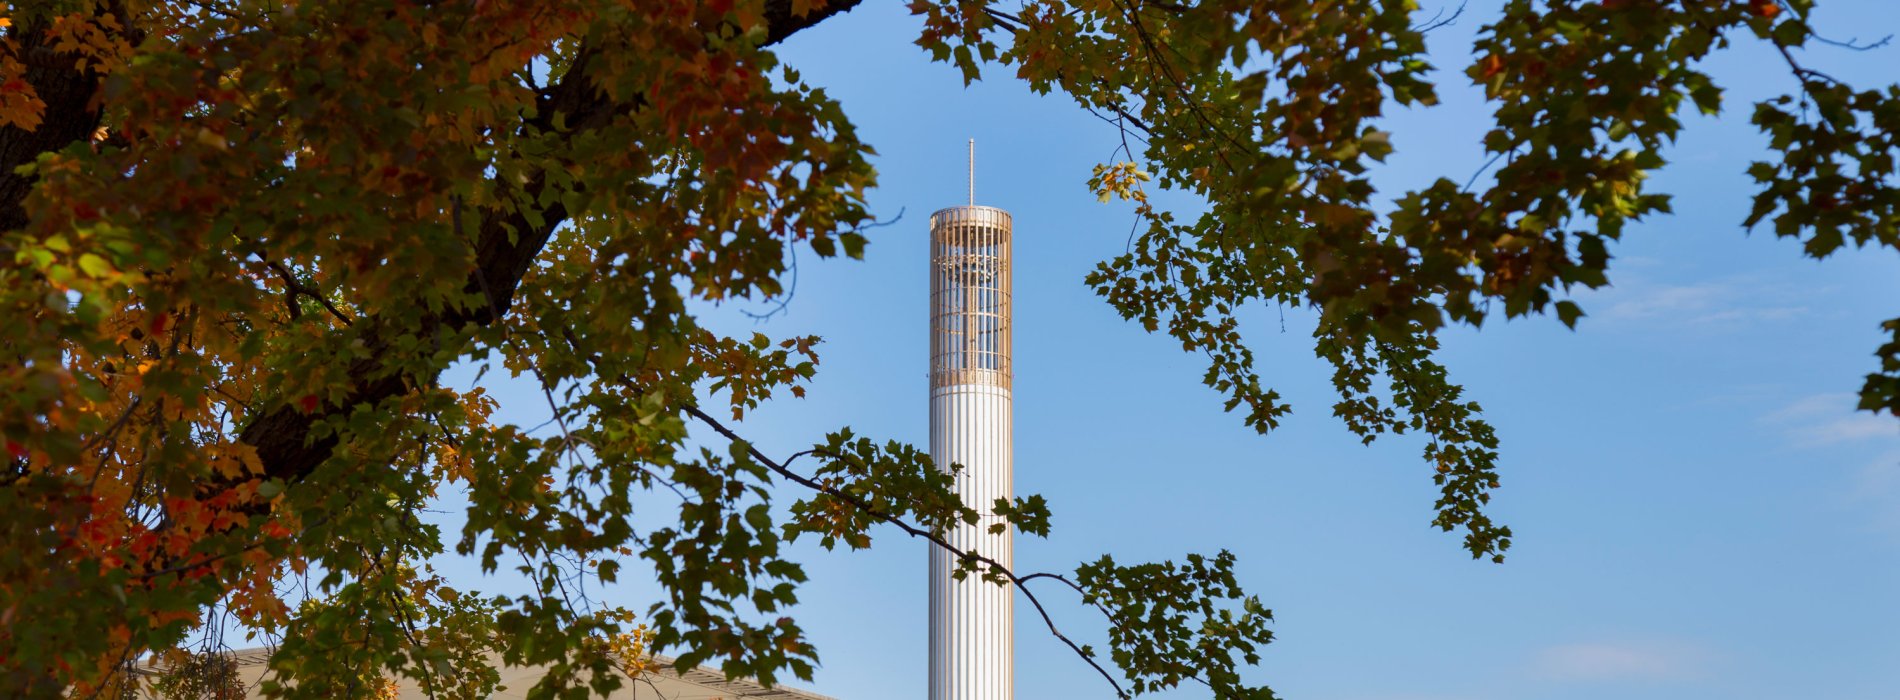 The UAlbany carillon, as seen through fall foliage on the Uptown Campus.